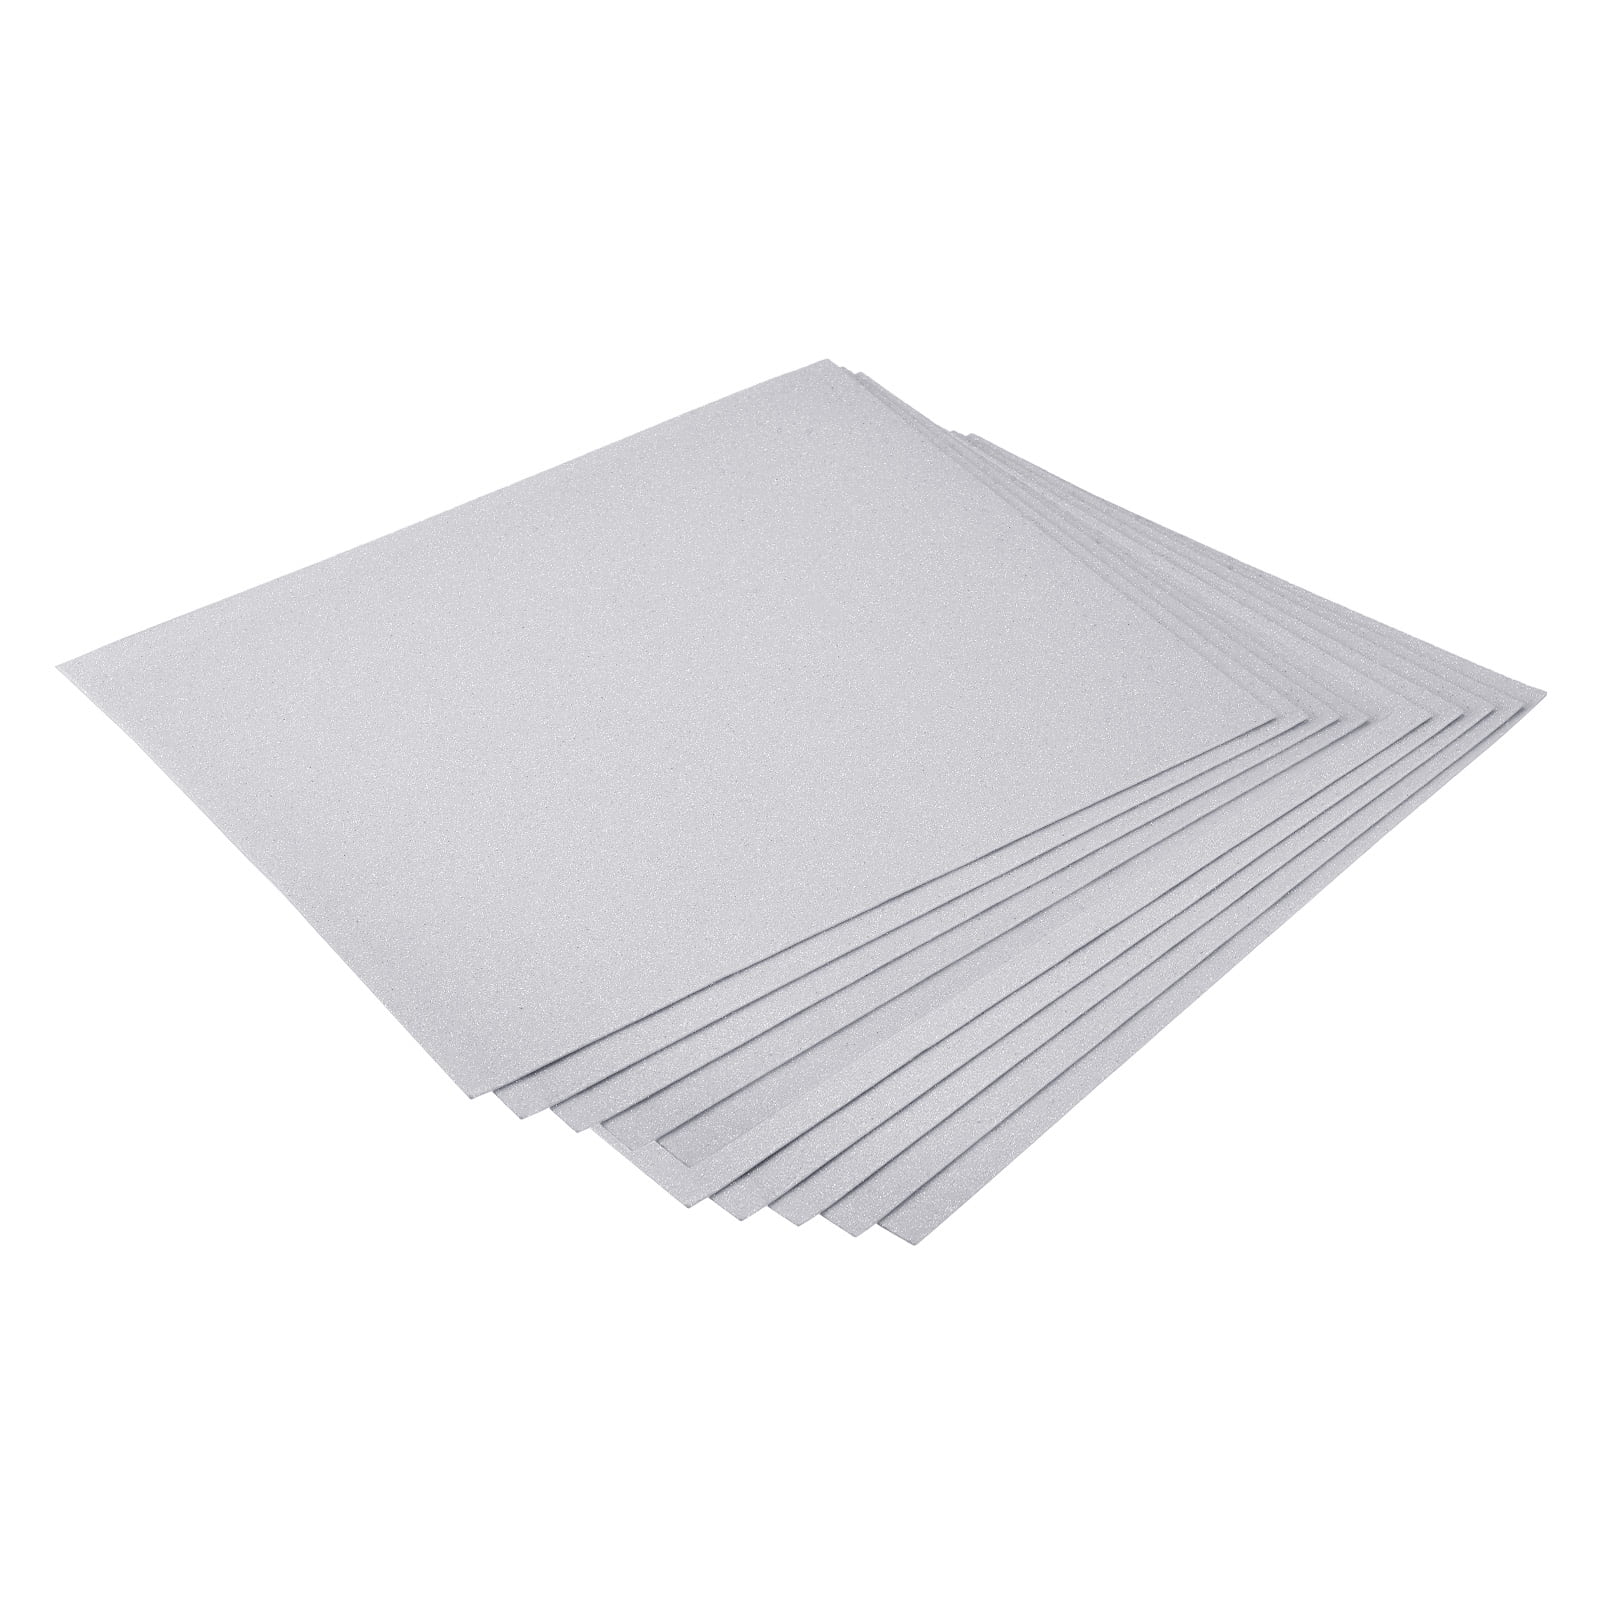 20 PCS EVA Foam Sheets DIY Handcraft Materials 1mm Thick 15.7 x 11.8 Inches  Colorful EVA Foam Papers for Arts and Crafts